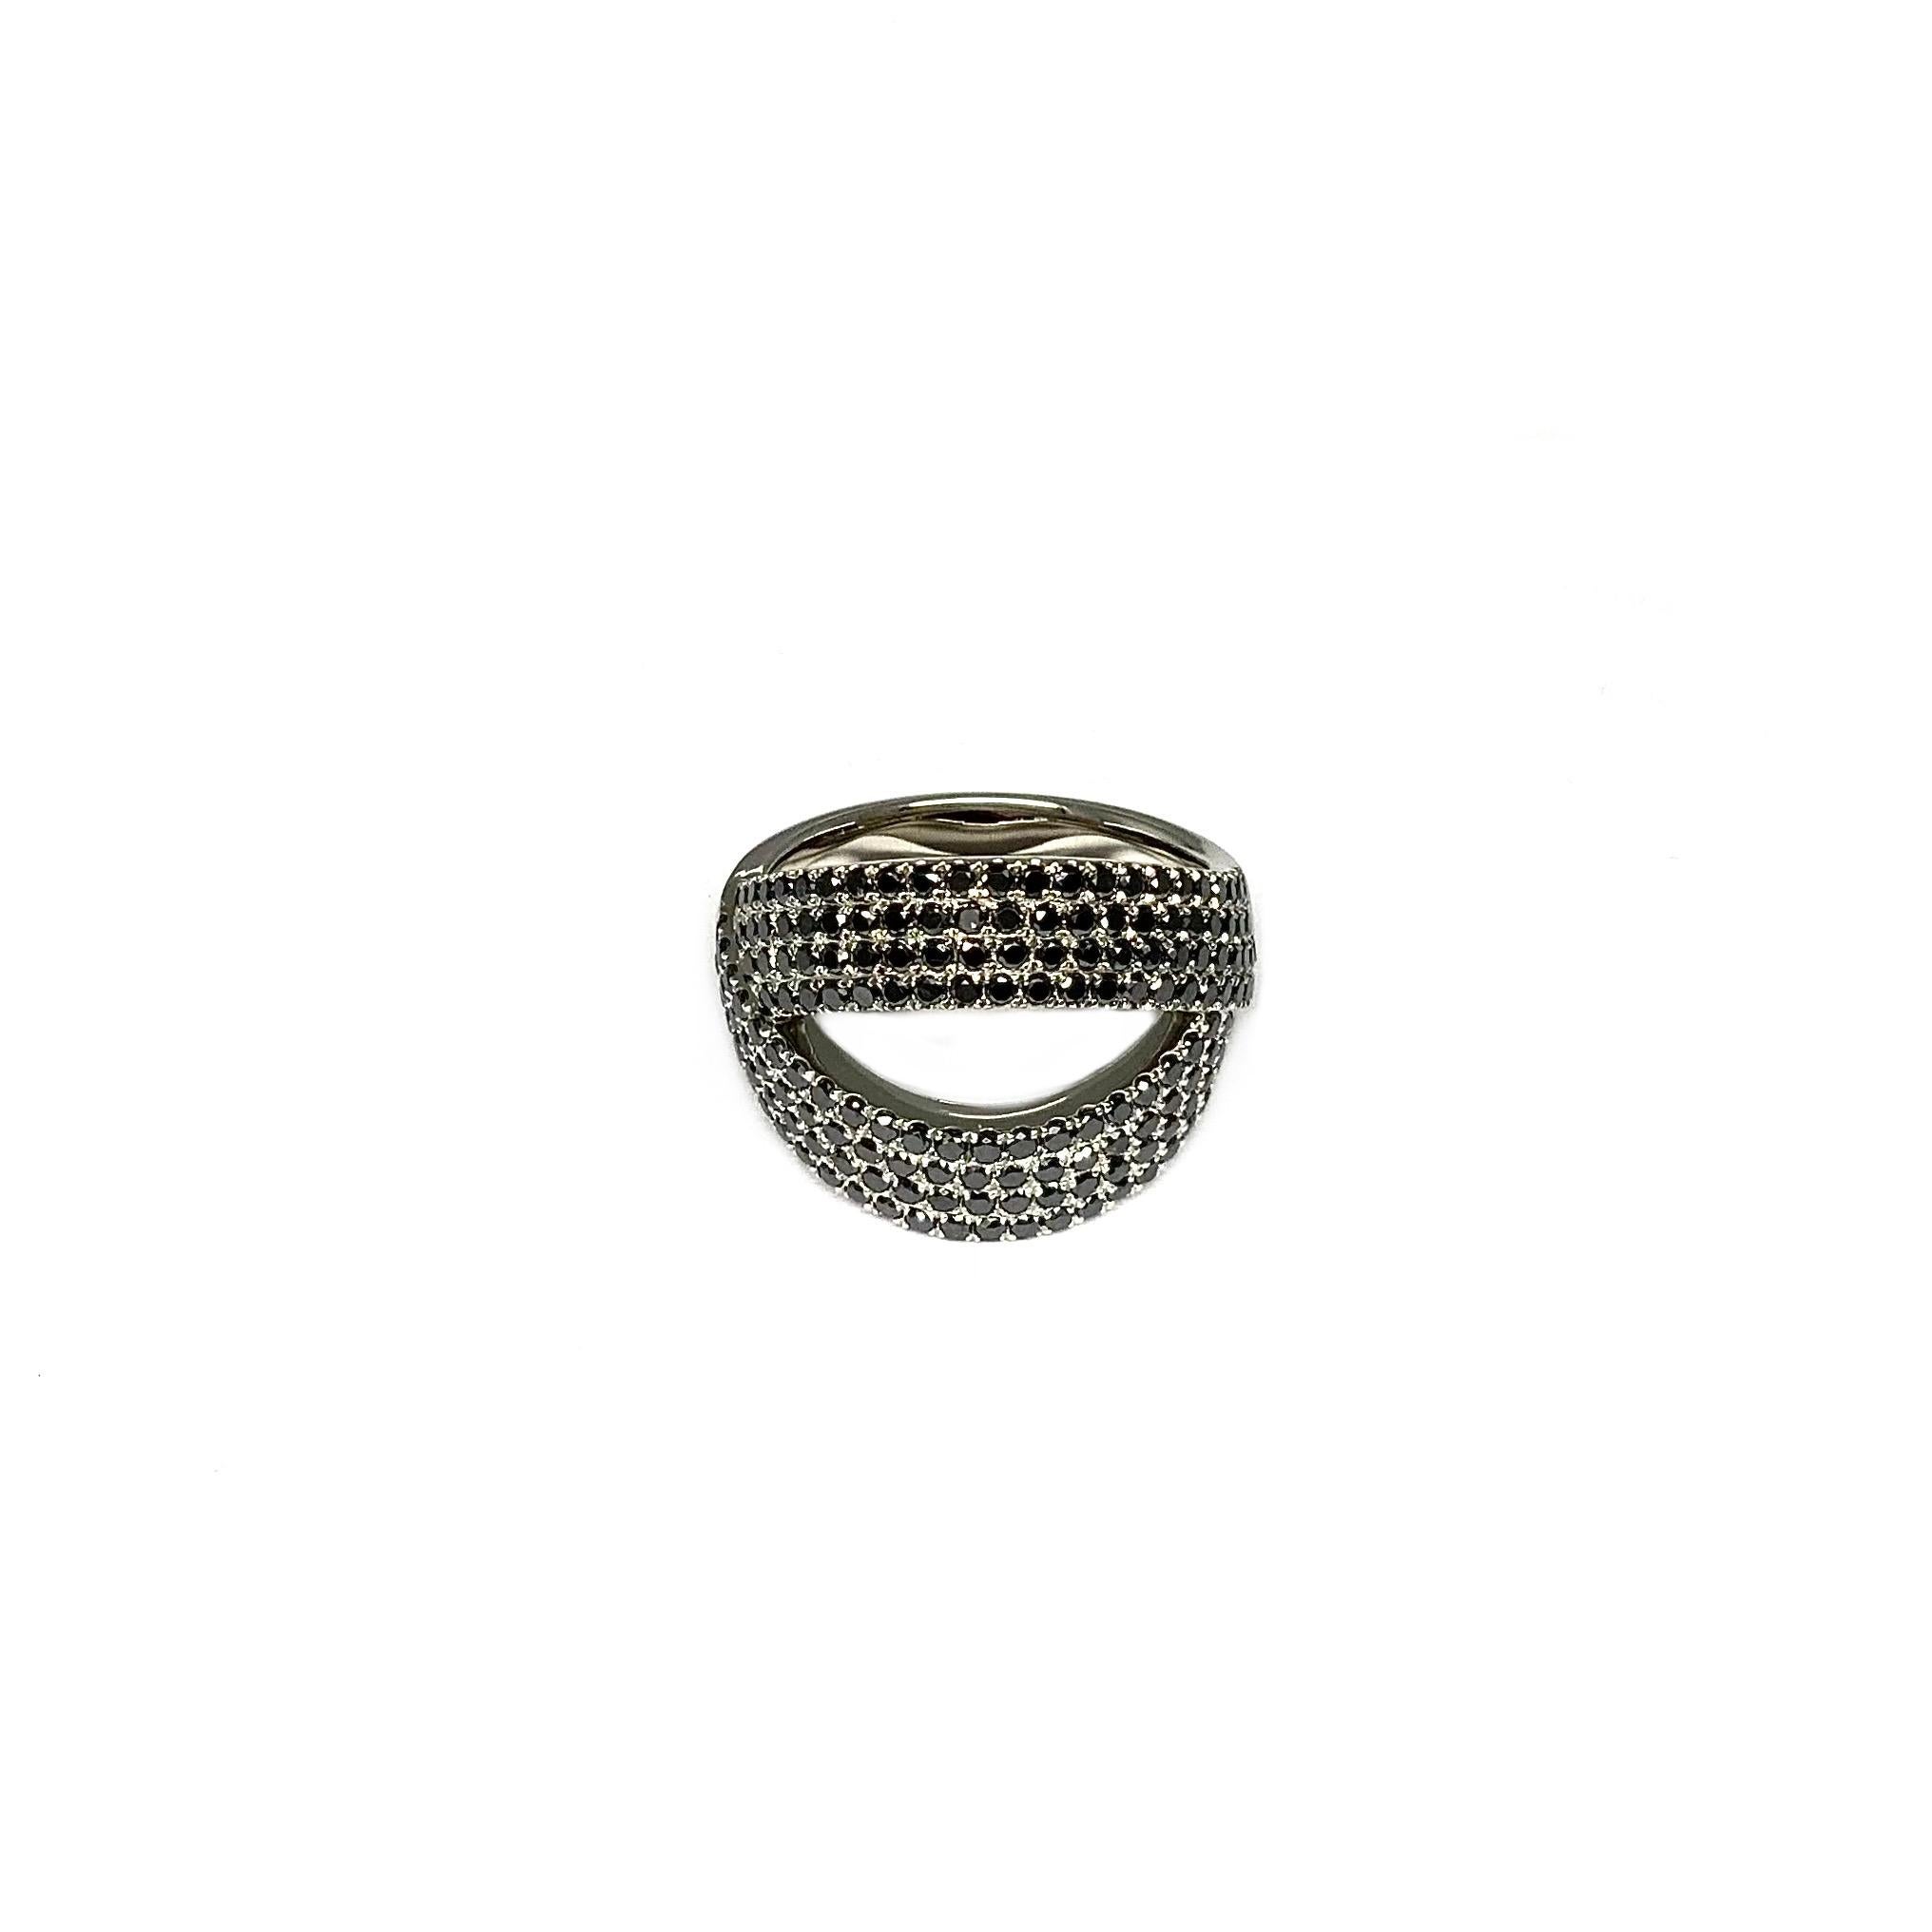 Ring in platinum 950 polished, head part width: 16.0mm height: 2.0mm. Ring band width: 5.3mm height: 1.7mm with 178 brilliant cut black diamonds 0.89ct. Ø: 1.0mm Ring size: 54

A meticulously crafted ring made from polished Platinum is a timeless